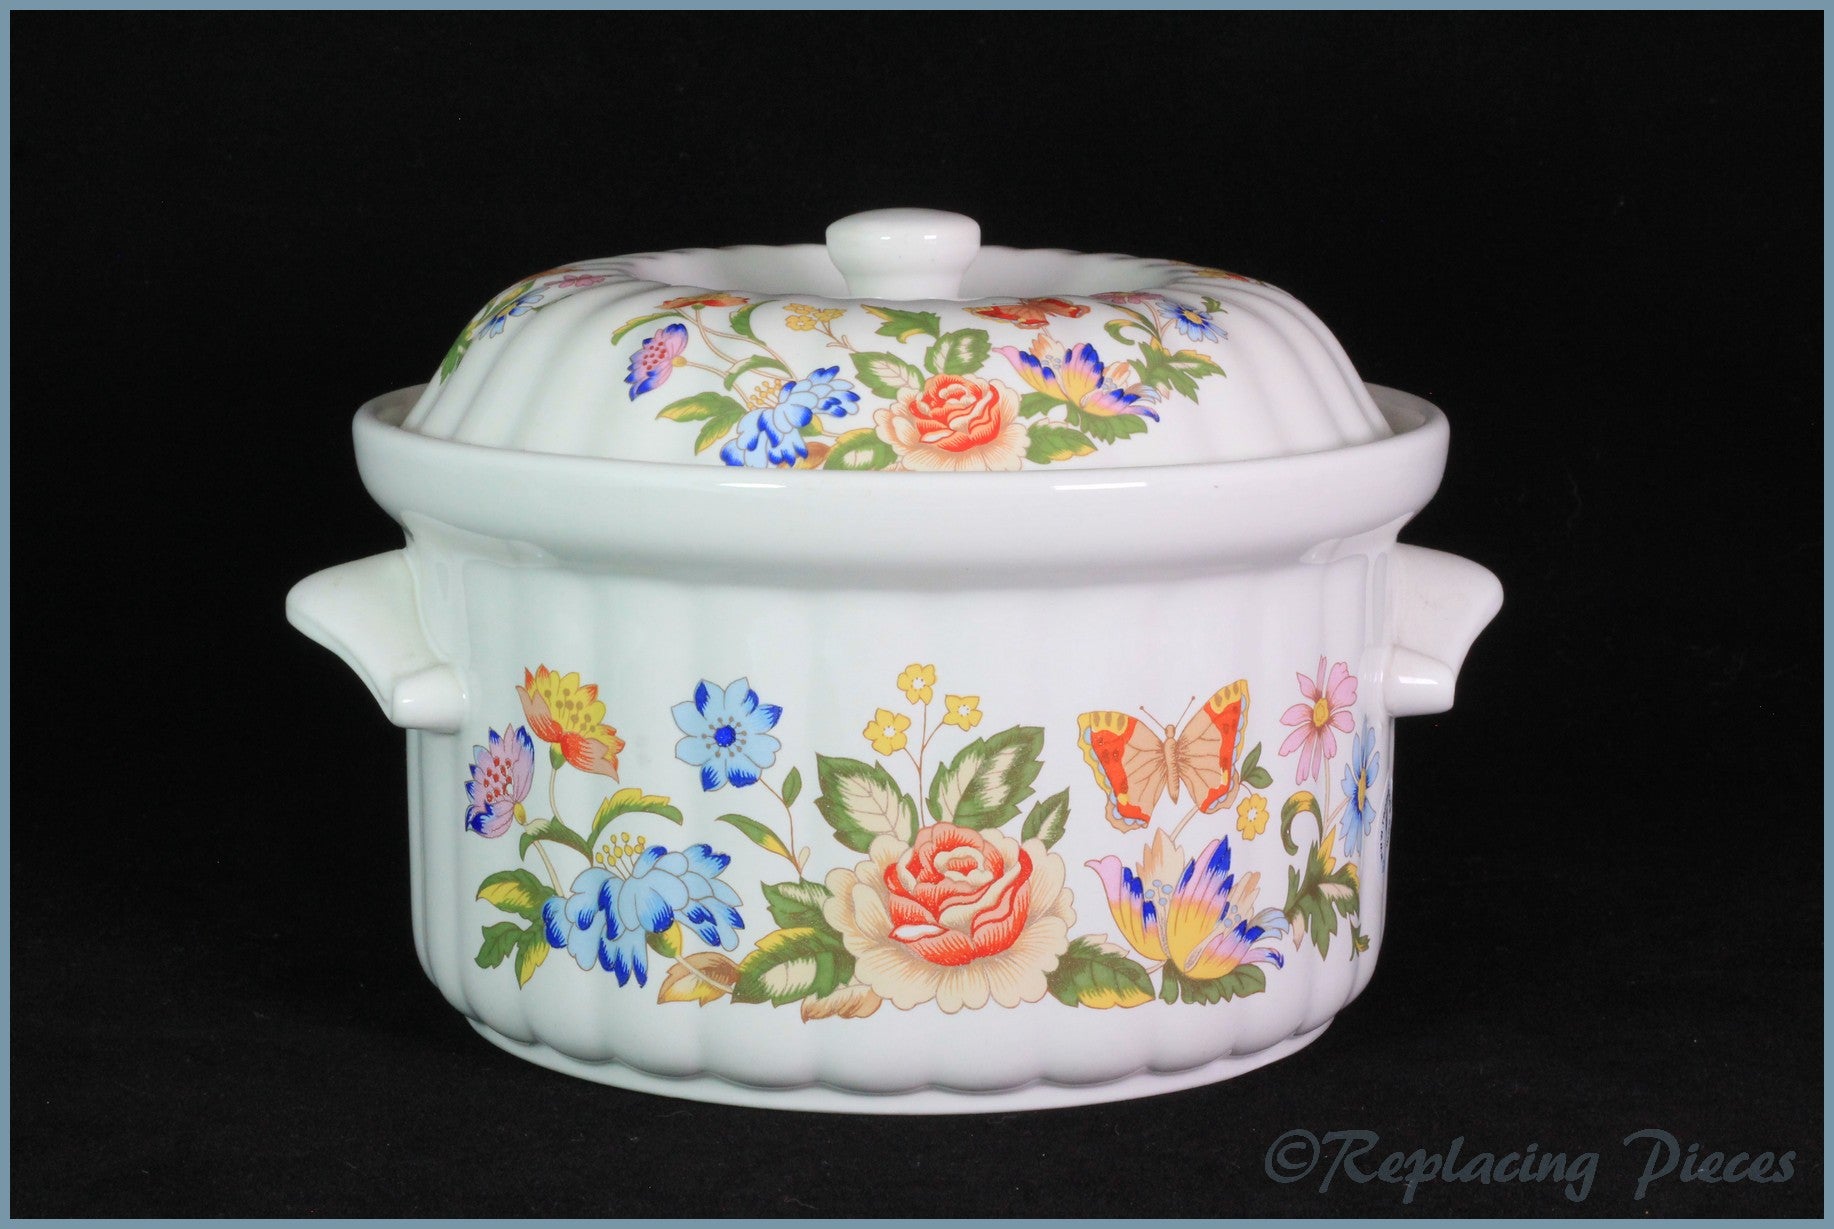 Aynsley Cottage Garden Casserole Dish Small Replacingpieces